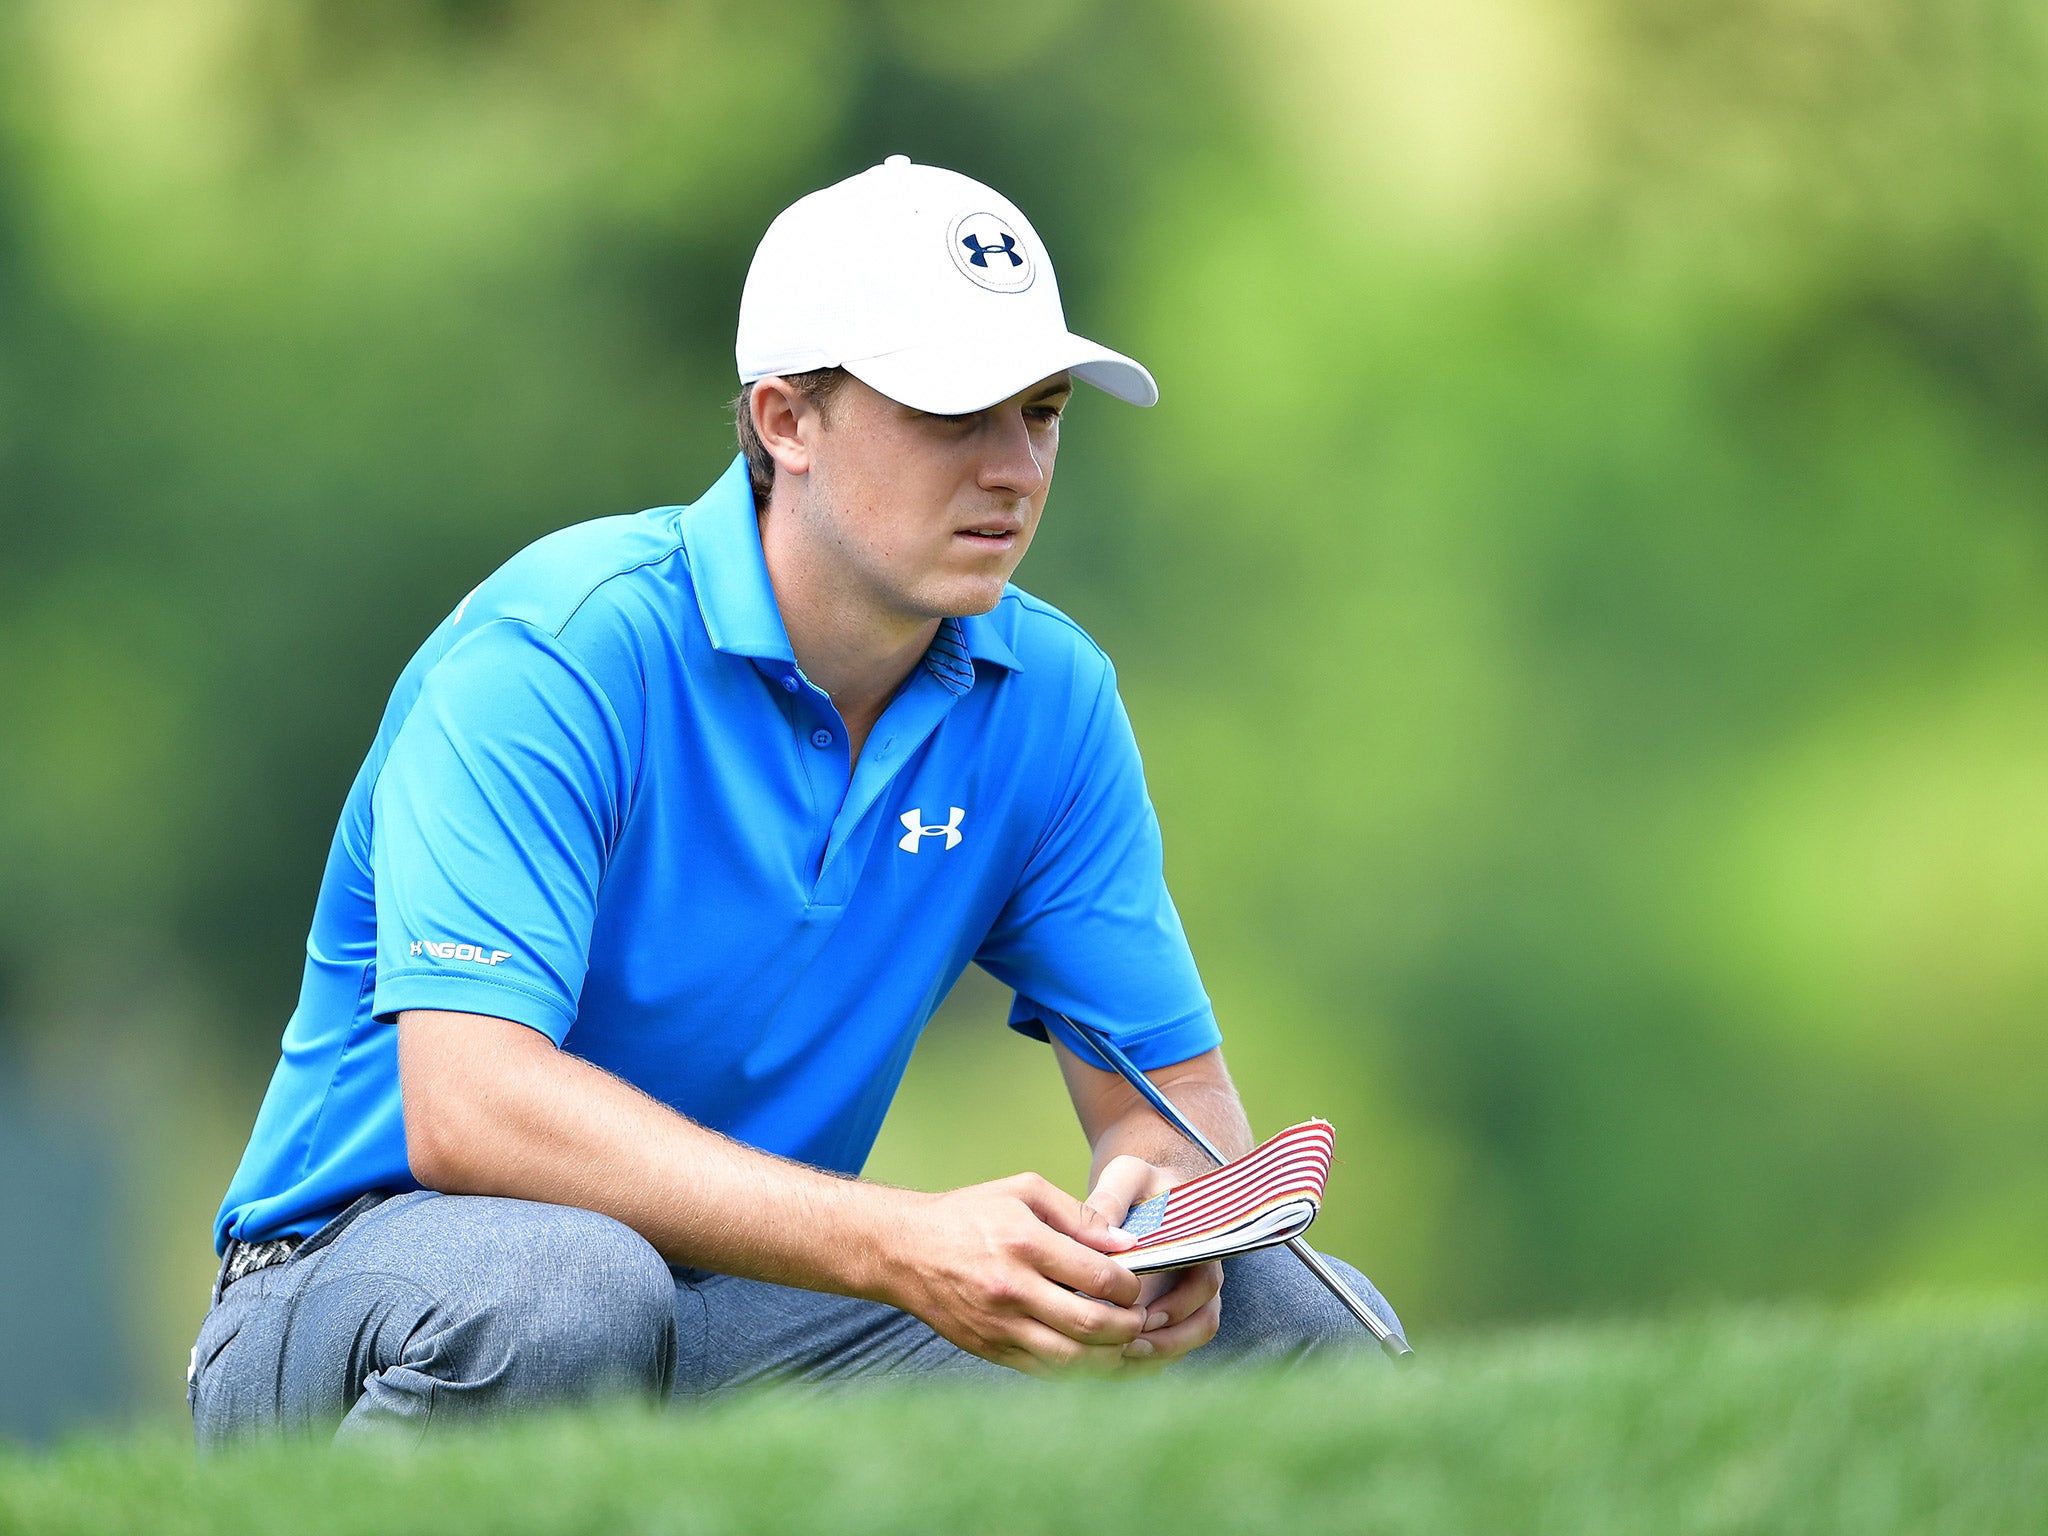 Jordan Spieth moved into contention after a strong start to Friday's round